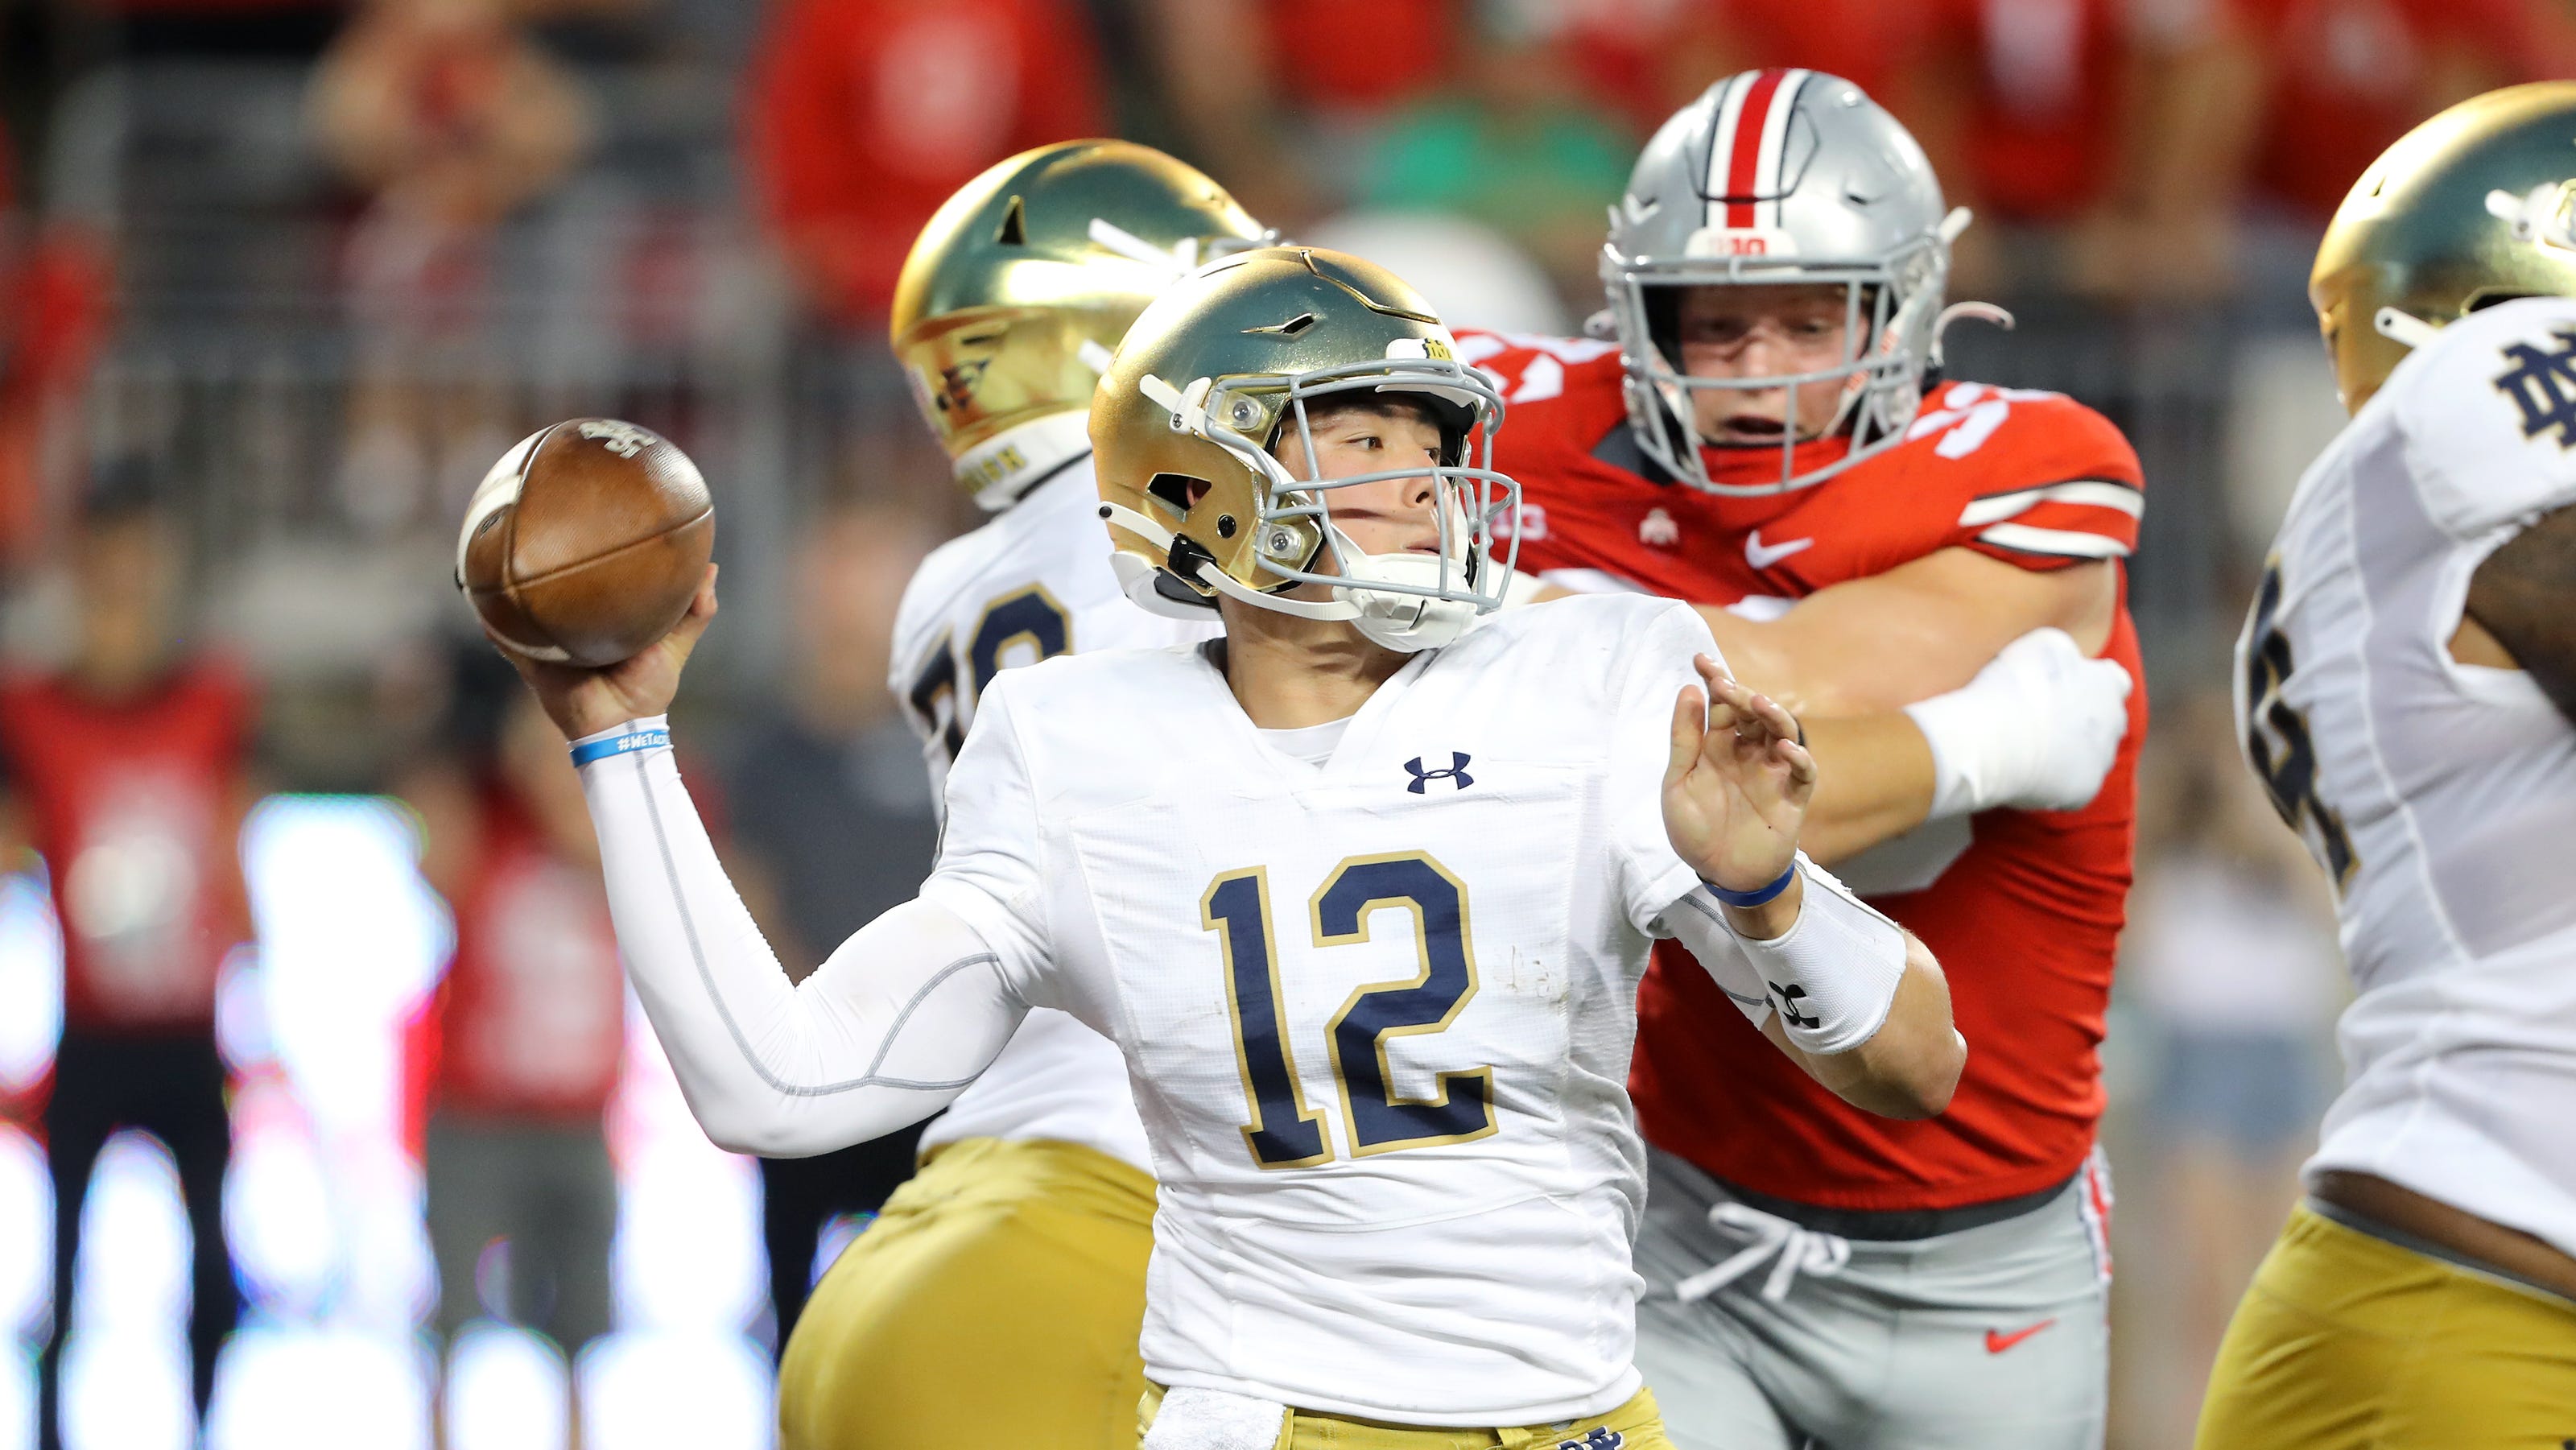 Notre Dame vs Ohio State football Scores, results, and highlights